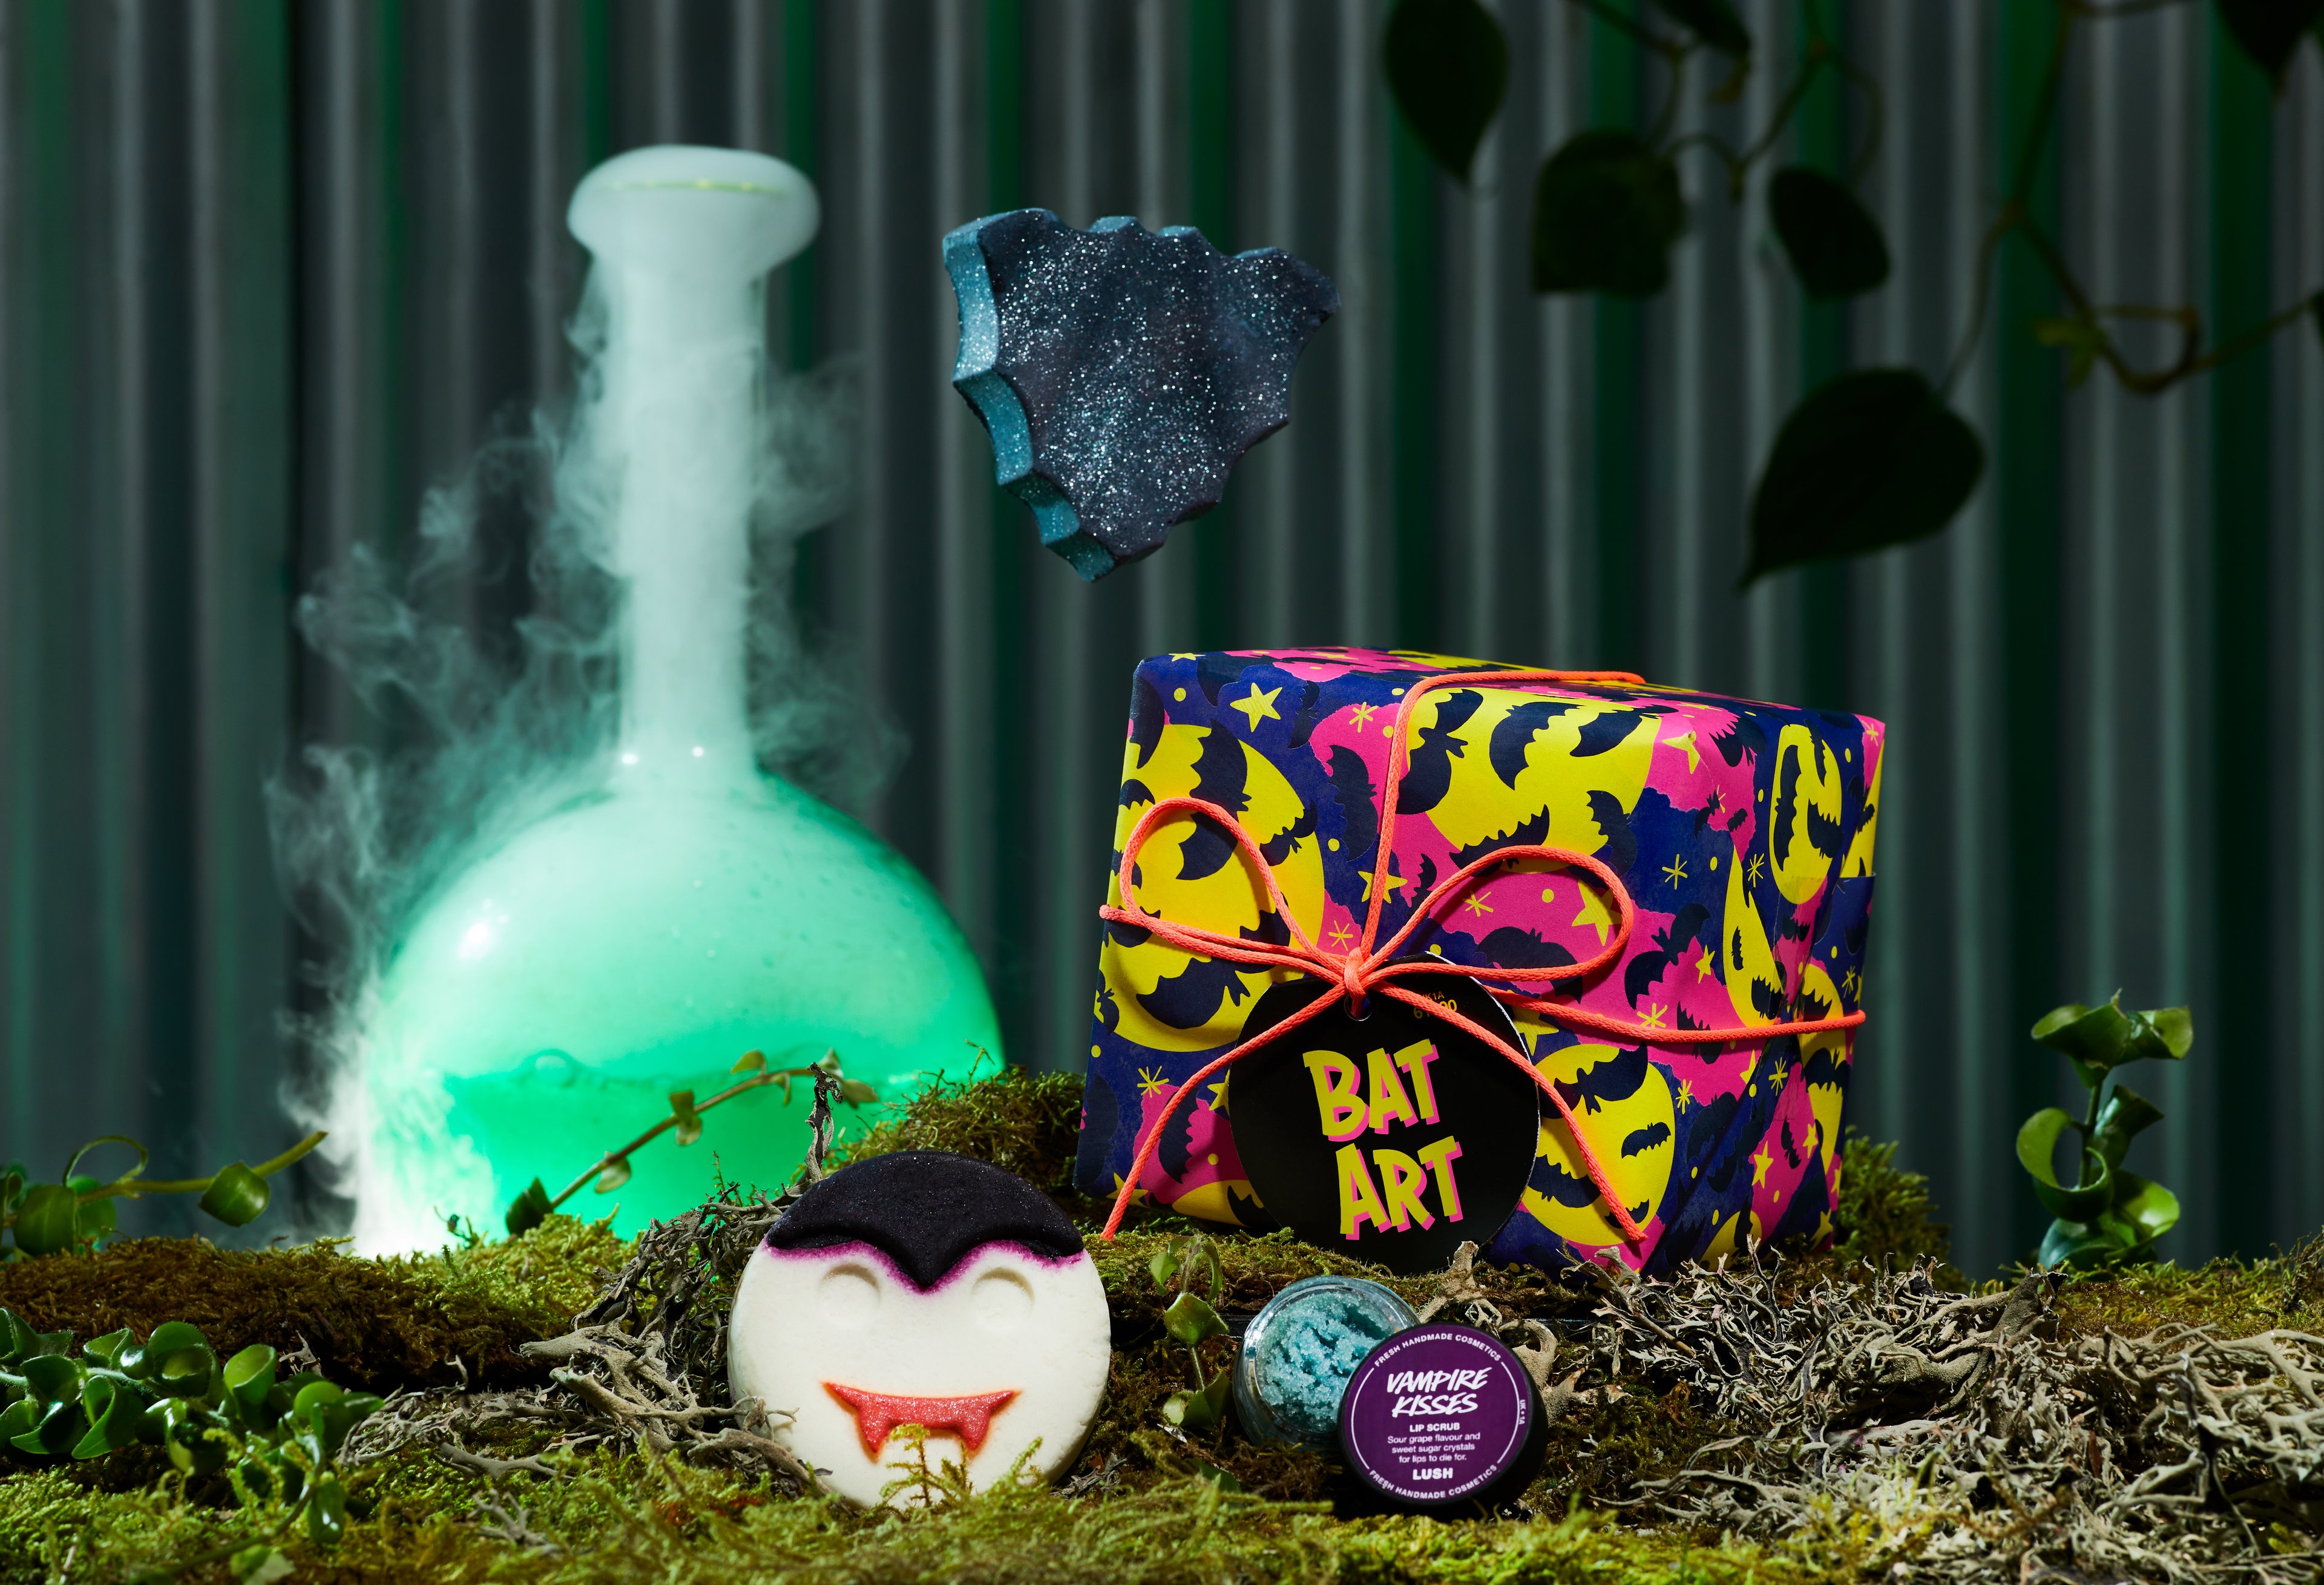 Bat Art gift, in front of a dark green background, surrounded by its products on a bed of moss. 